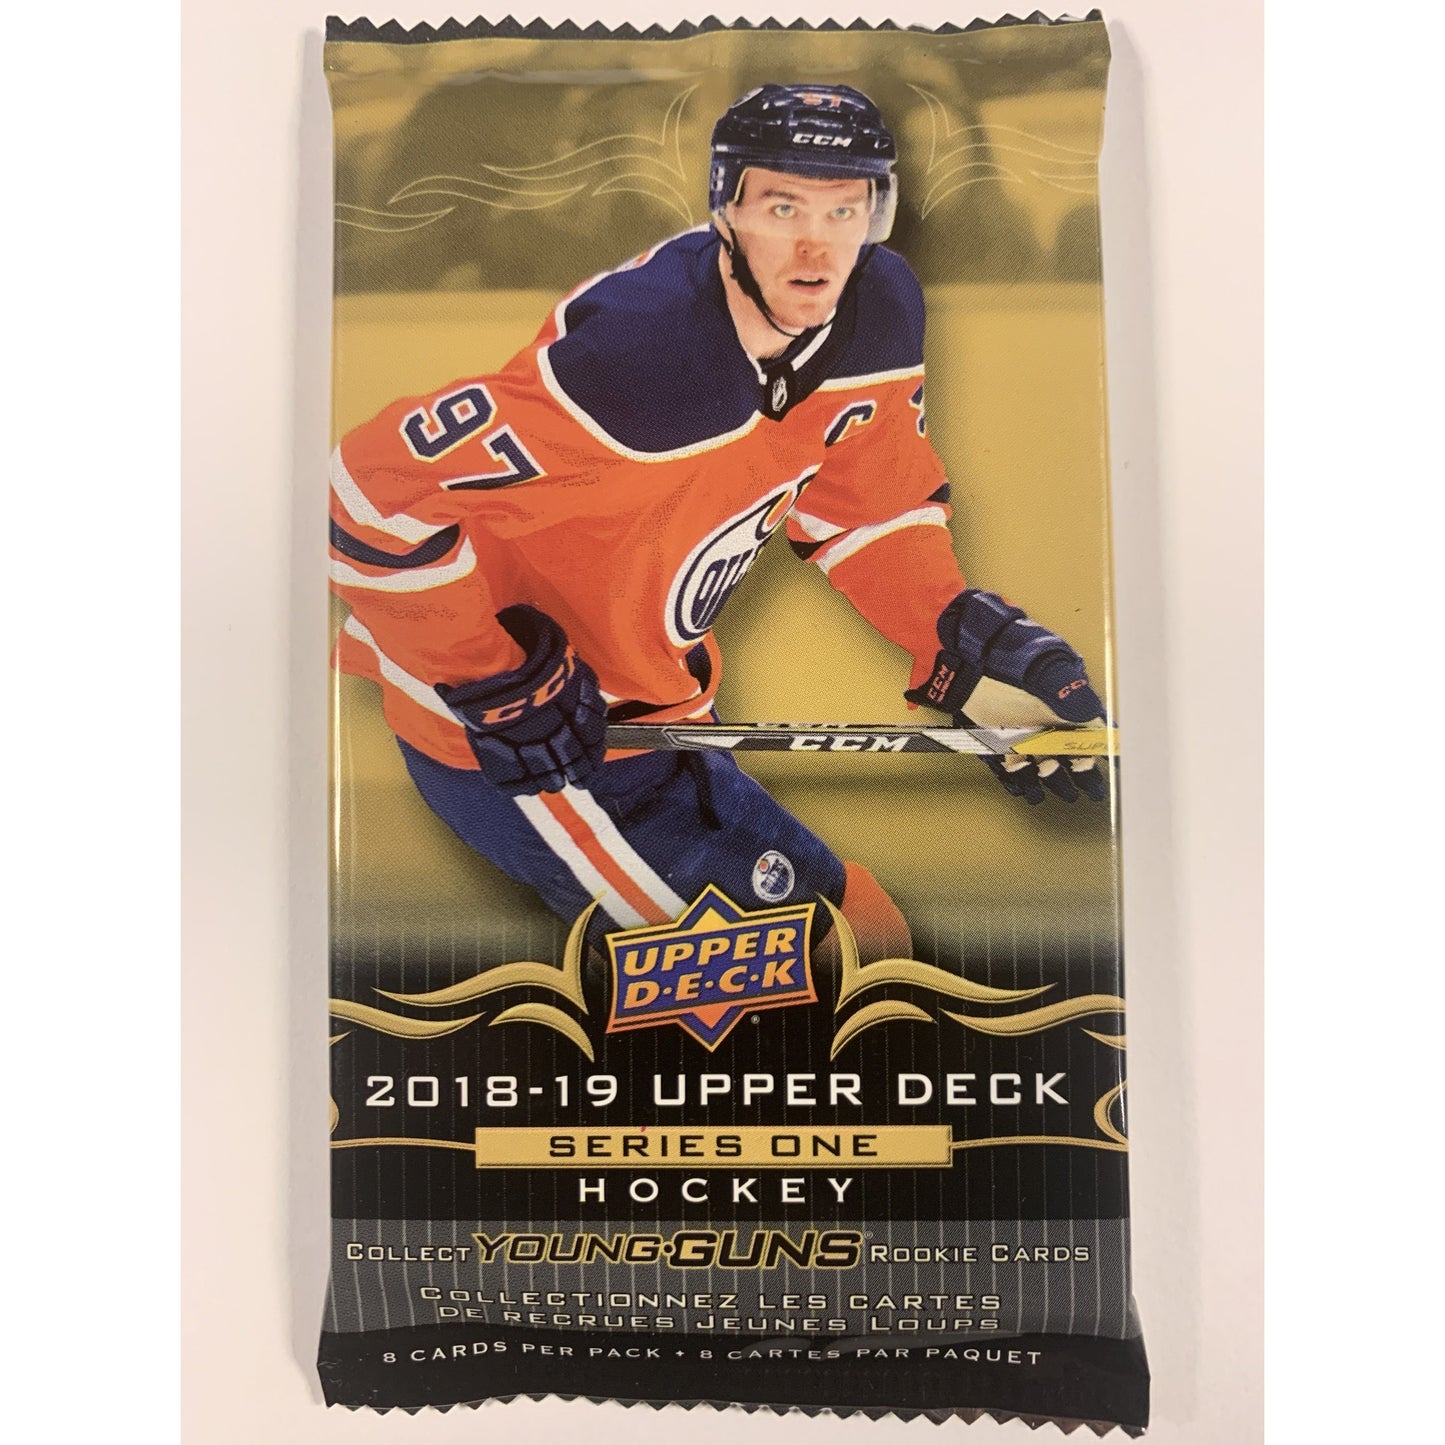  2018-19 Upper Deck Series 1 Hockey Retail Pack  Local Legends Cards & Collectibles